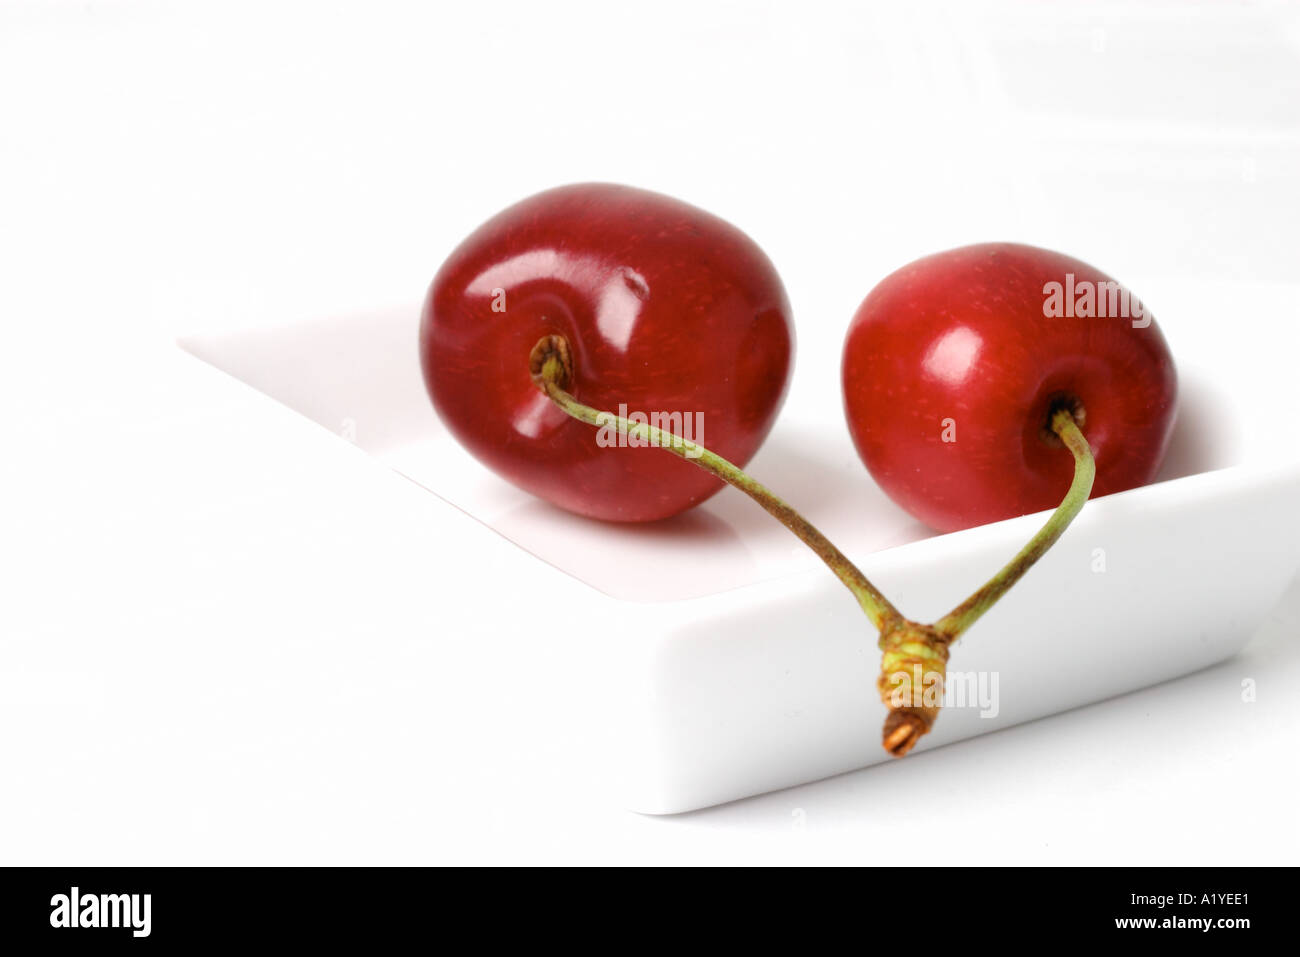 Pair of cherries in a white porcellain bowl Stock Photo